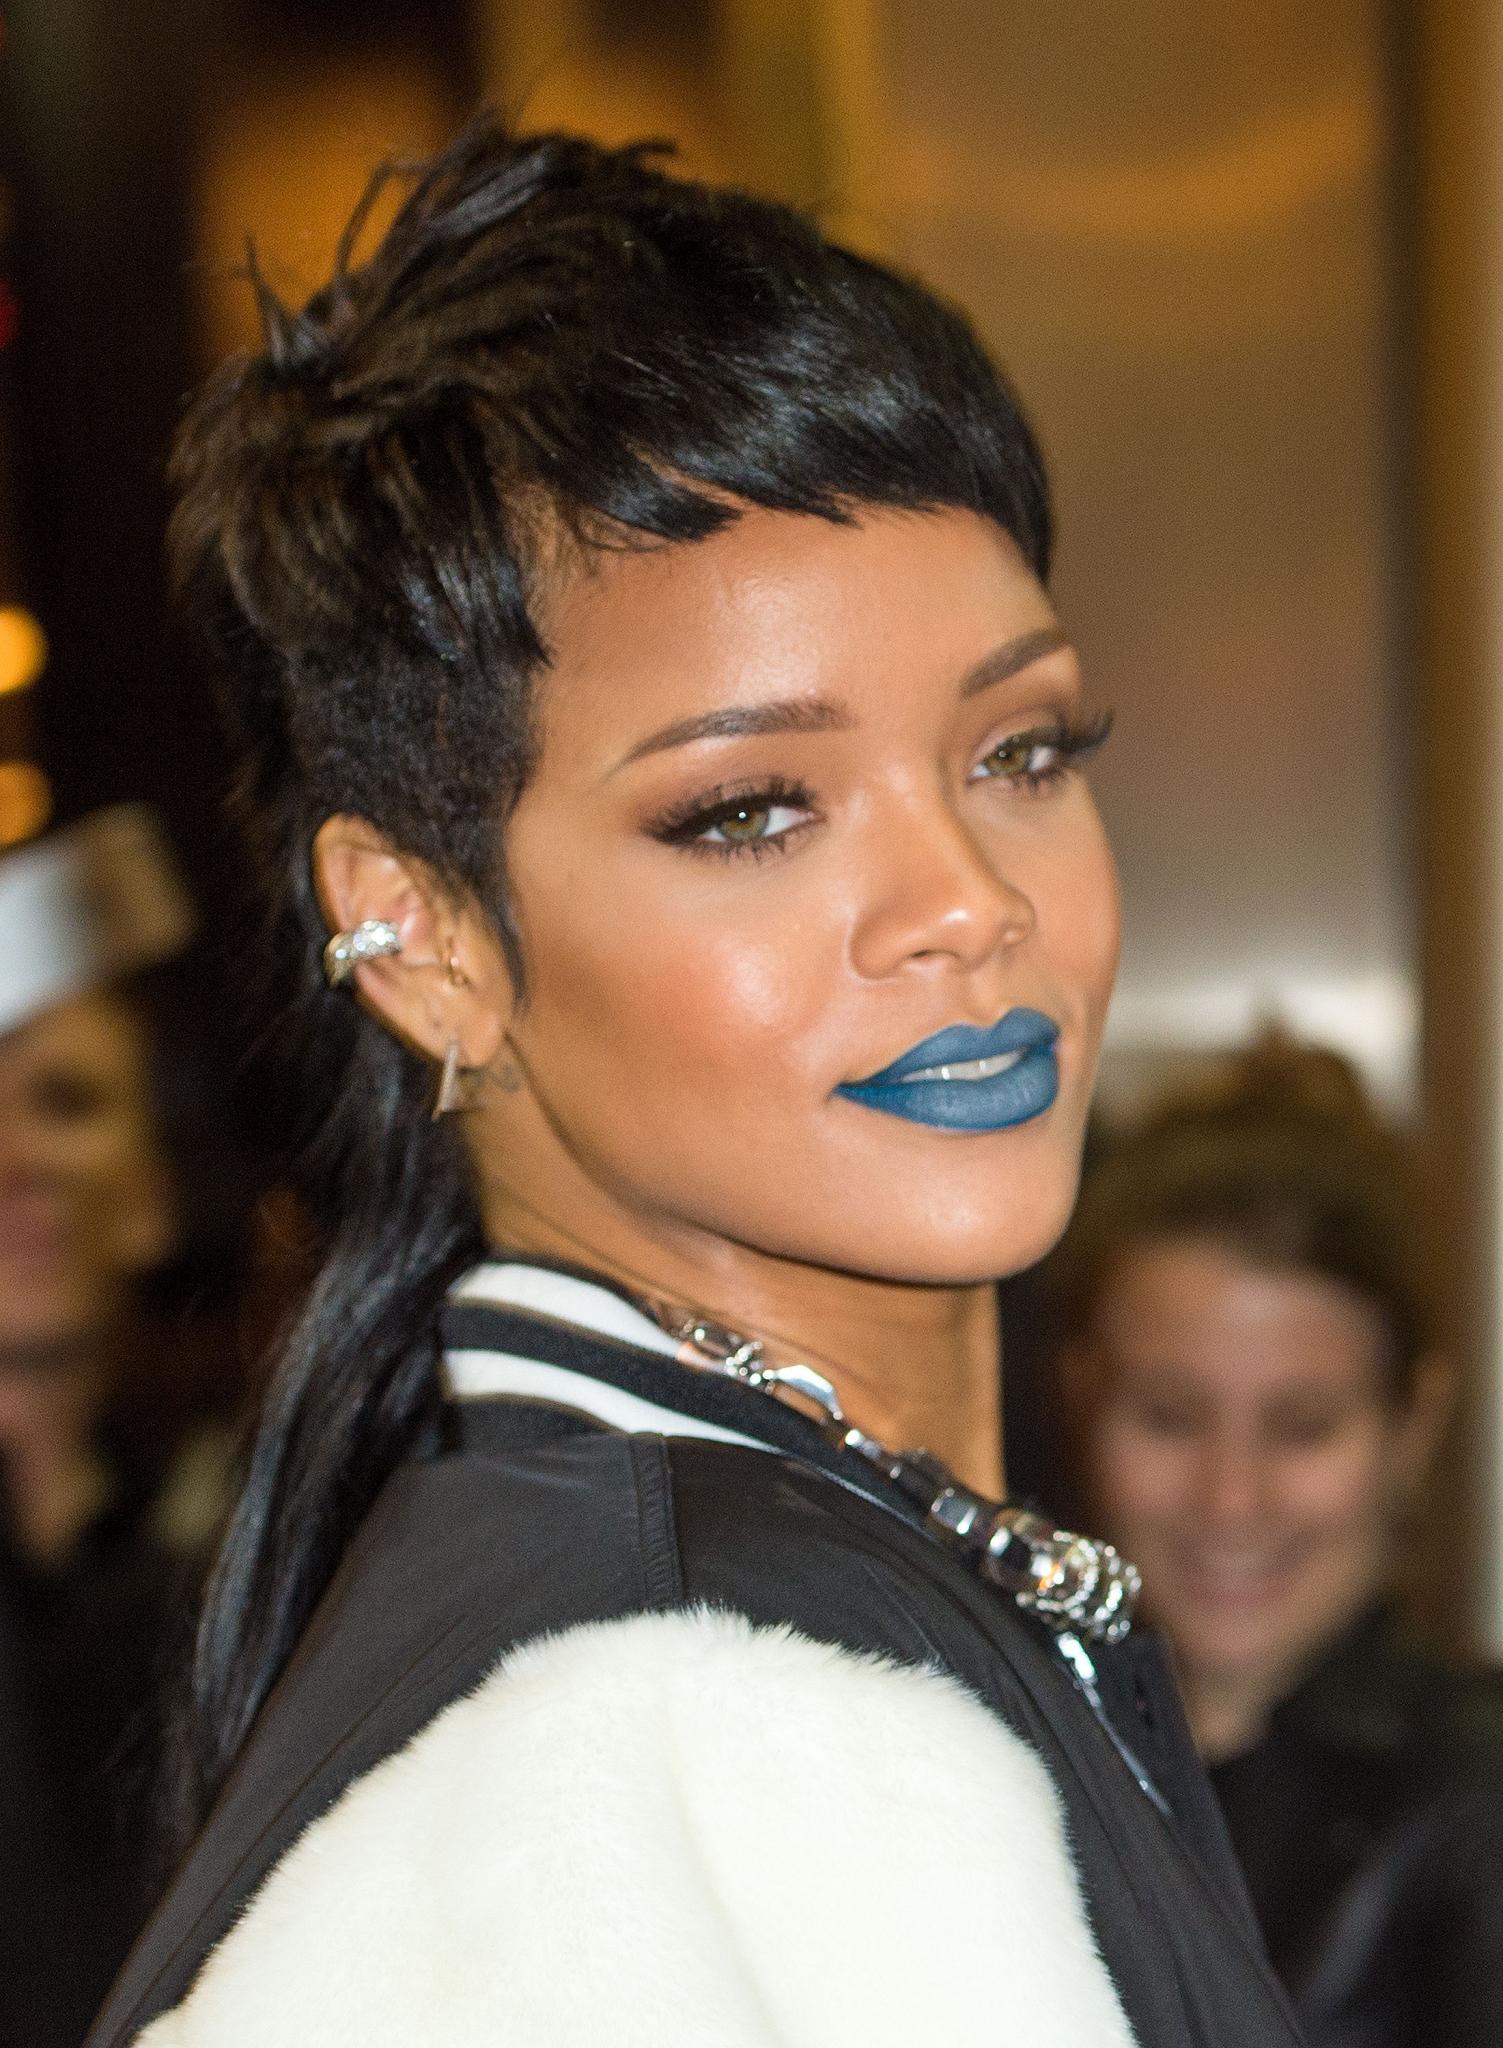 25 Reasons Rihanna Is the Ultimate Hair Muse
